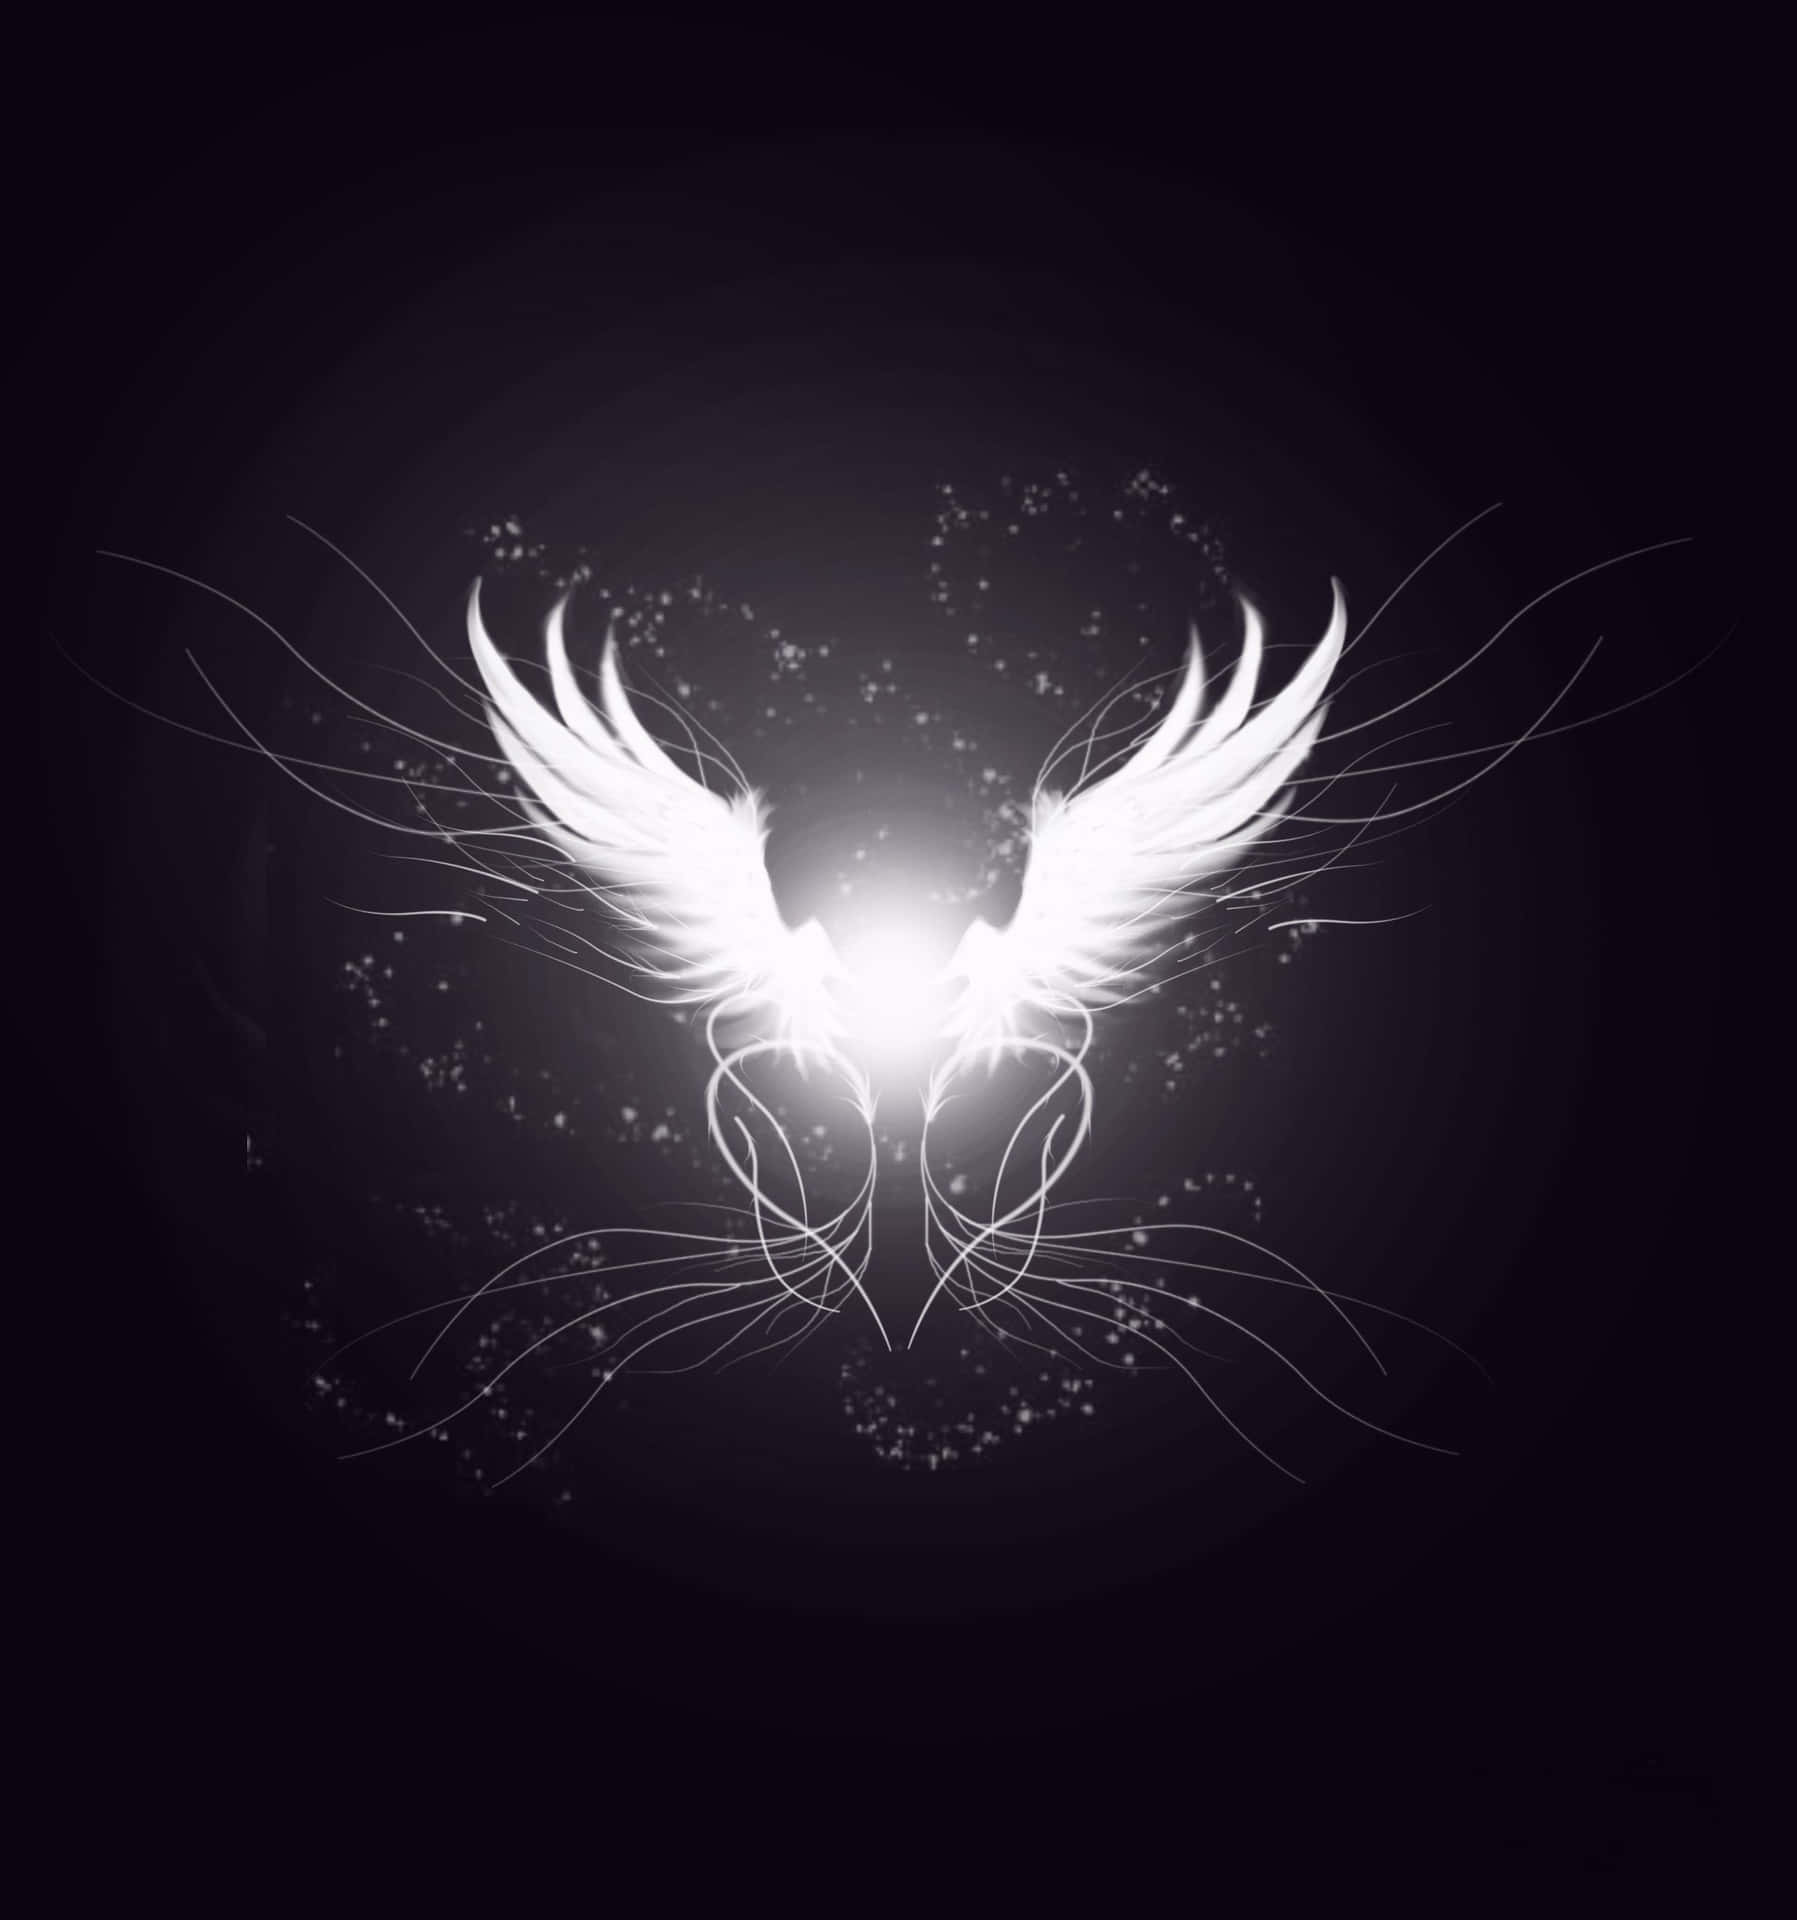 angel wings on a black background